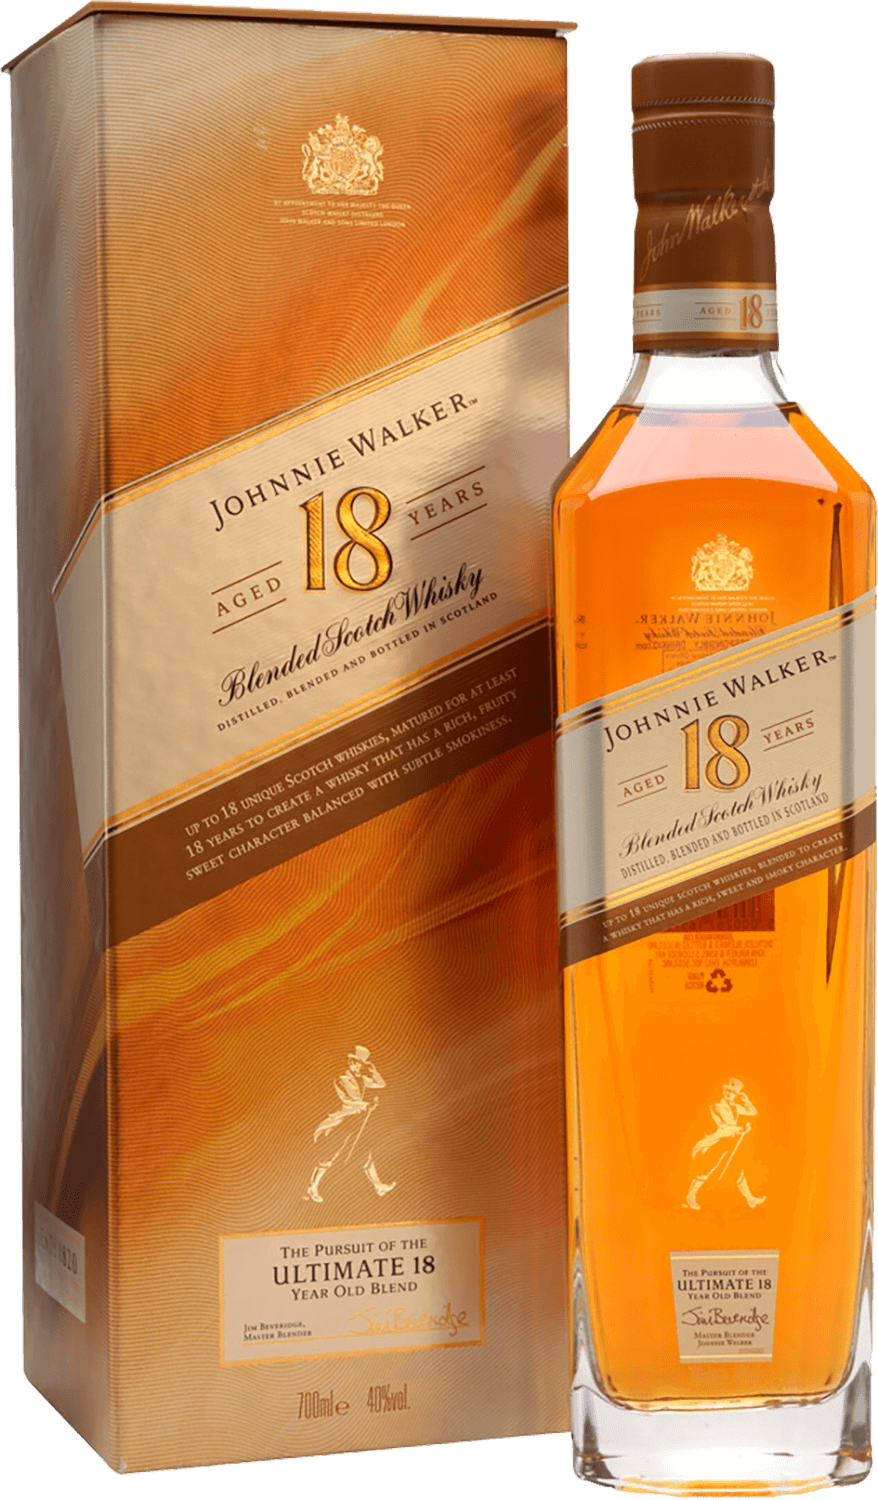 Johnnie Walker 18 y.o. Blended Scotch Whisky (gift box) johnnie walker green label blended scotch whisky gift box